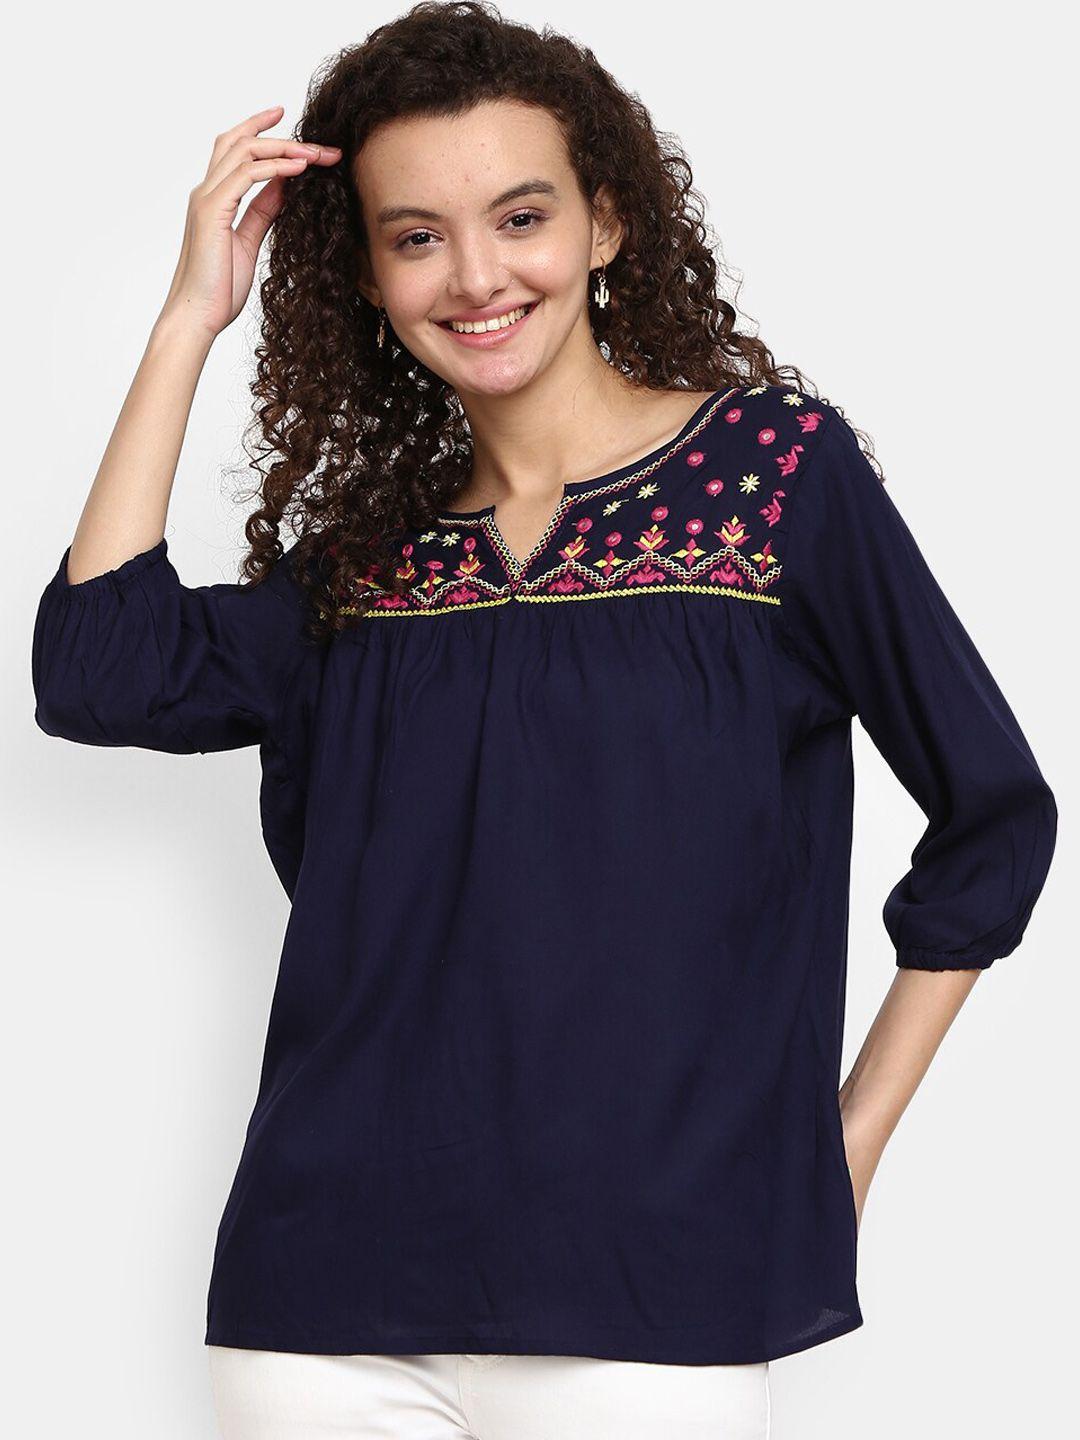 v-mart women navy blue floral embroidered poly cotton round neck top